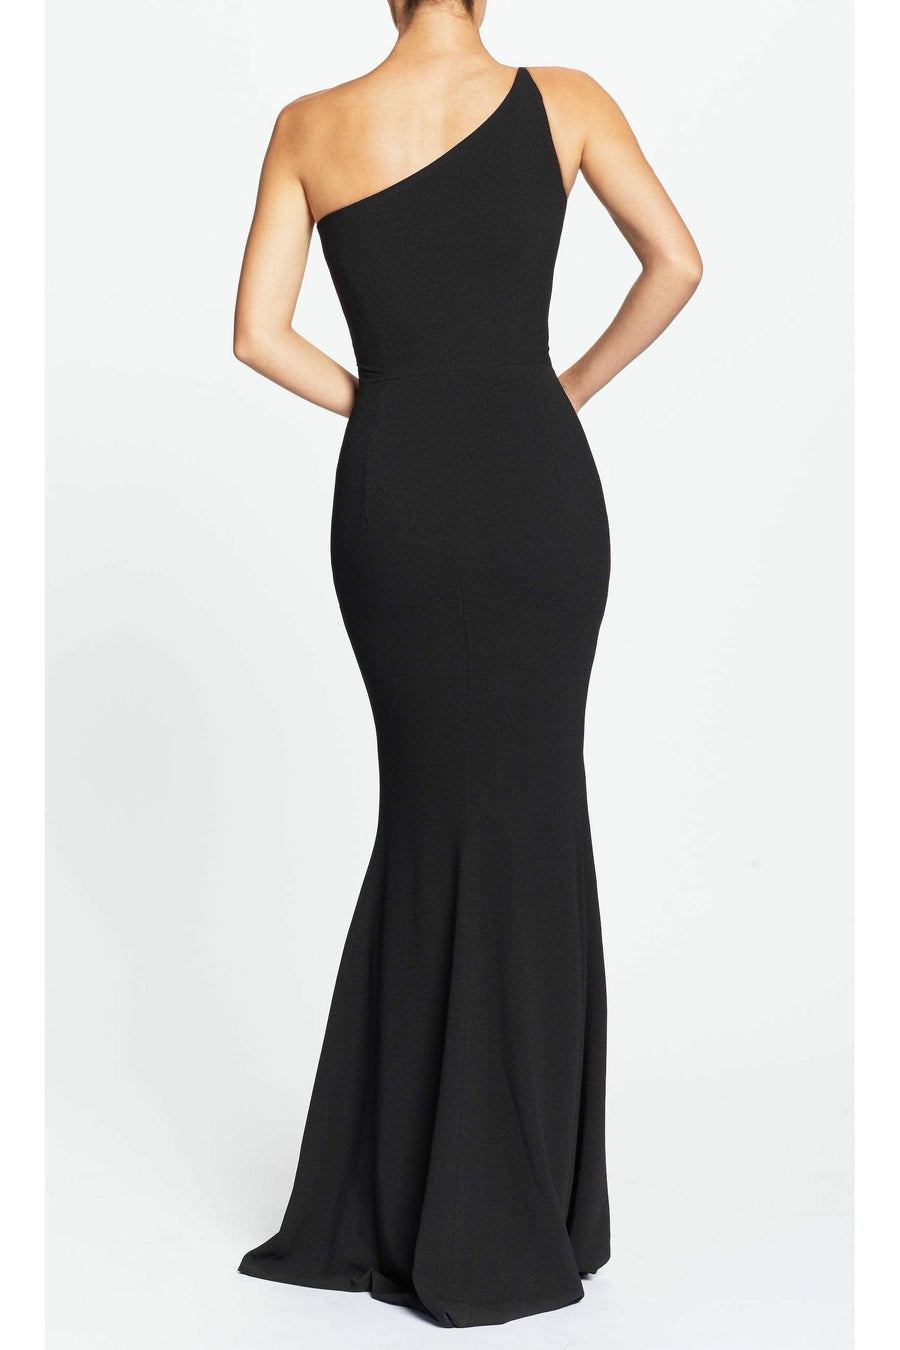 Amy Classic Black High-Slit Gown - Dress the Population